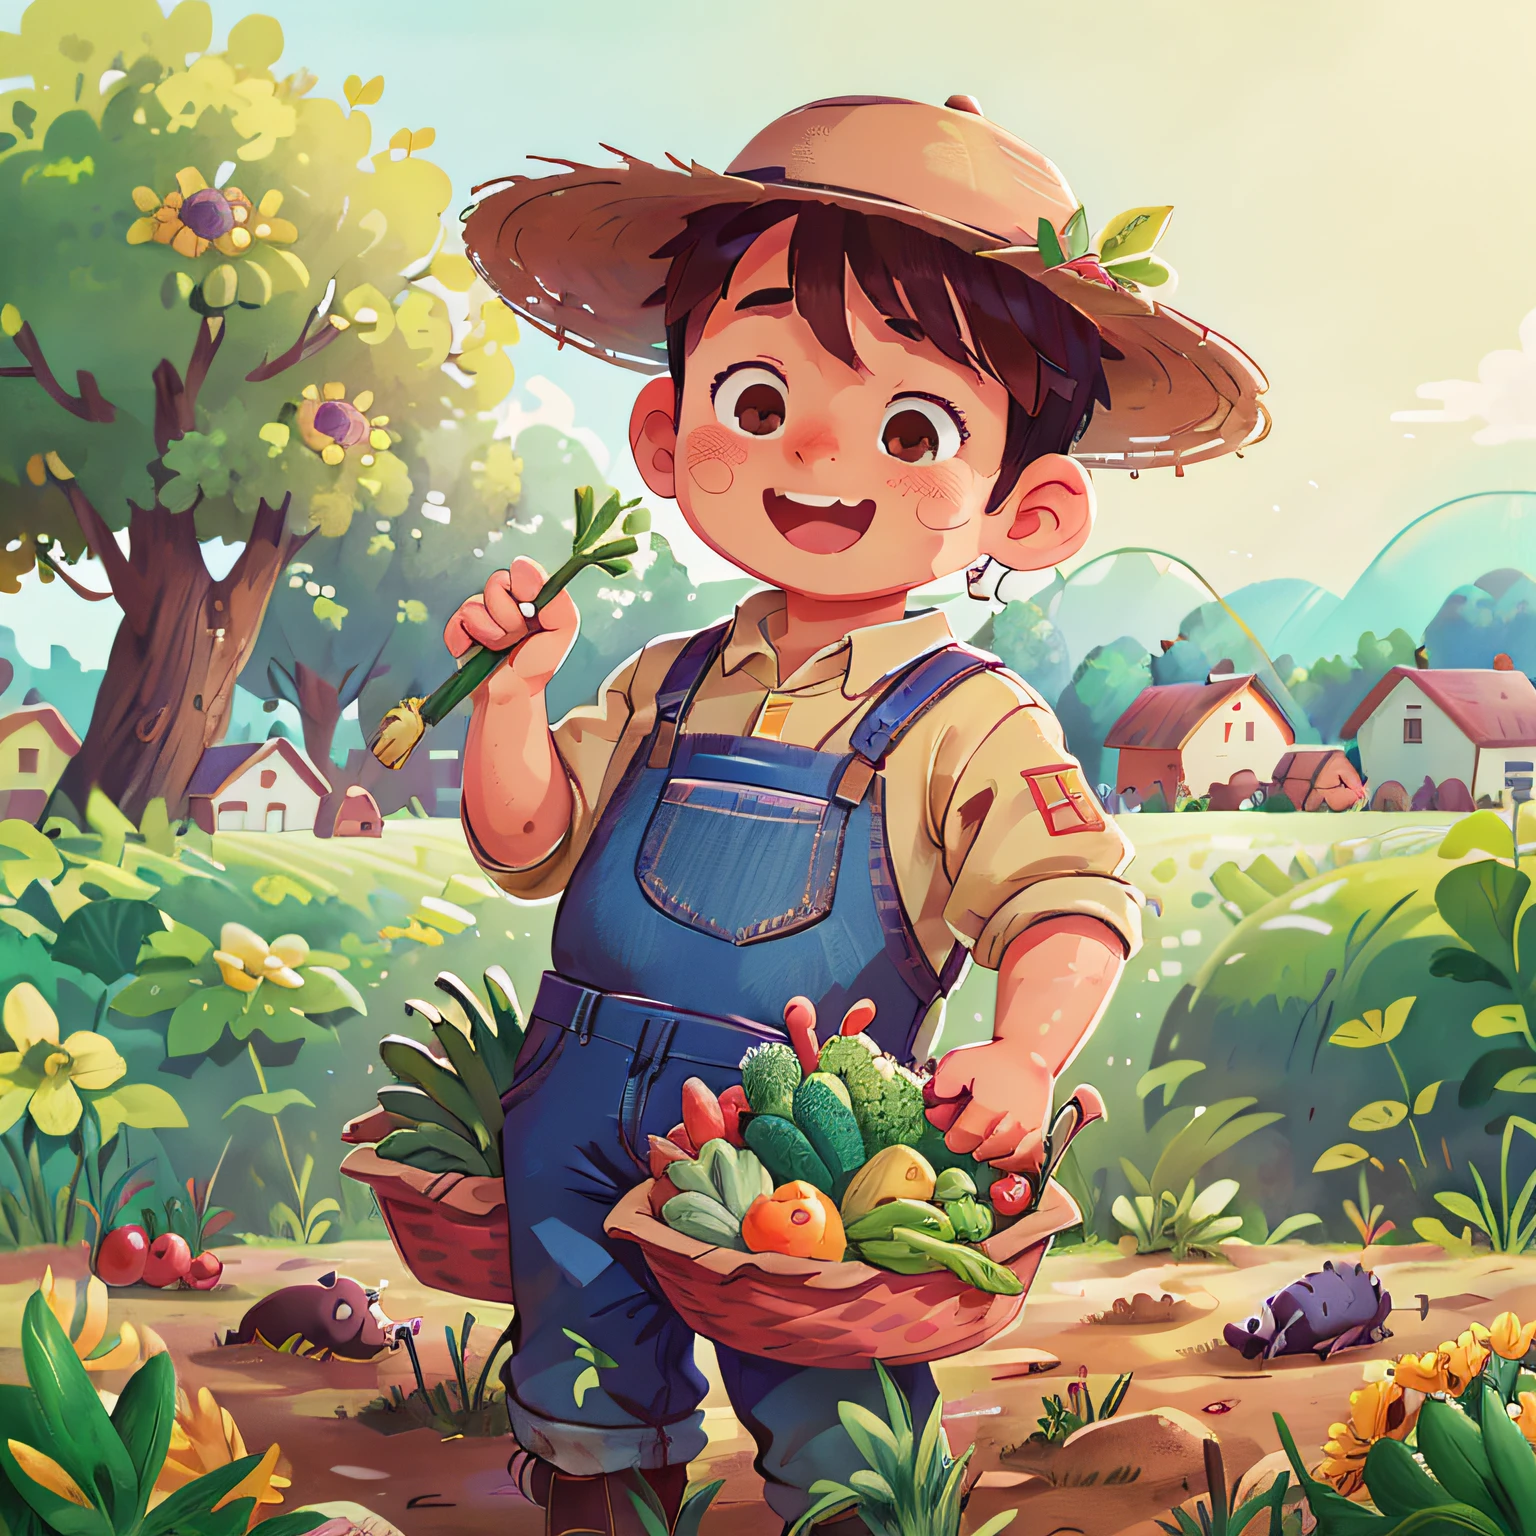 Farmer's clothing、Male 、The background is a farm、Harvesting vegetables、Idyllic atmosphere、perfectquality、Clear focus (Clutter-Home:0.8)、(​masterpiece:1.2) (realisitic:1.2) (bokeh dof) (top-quality) (detailed skins:1.3) (intricate-detail) (8K) (Eye of Detail) (foco nítido), (Happiness)